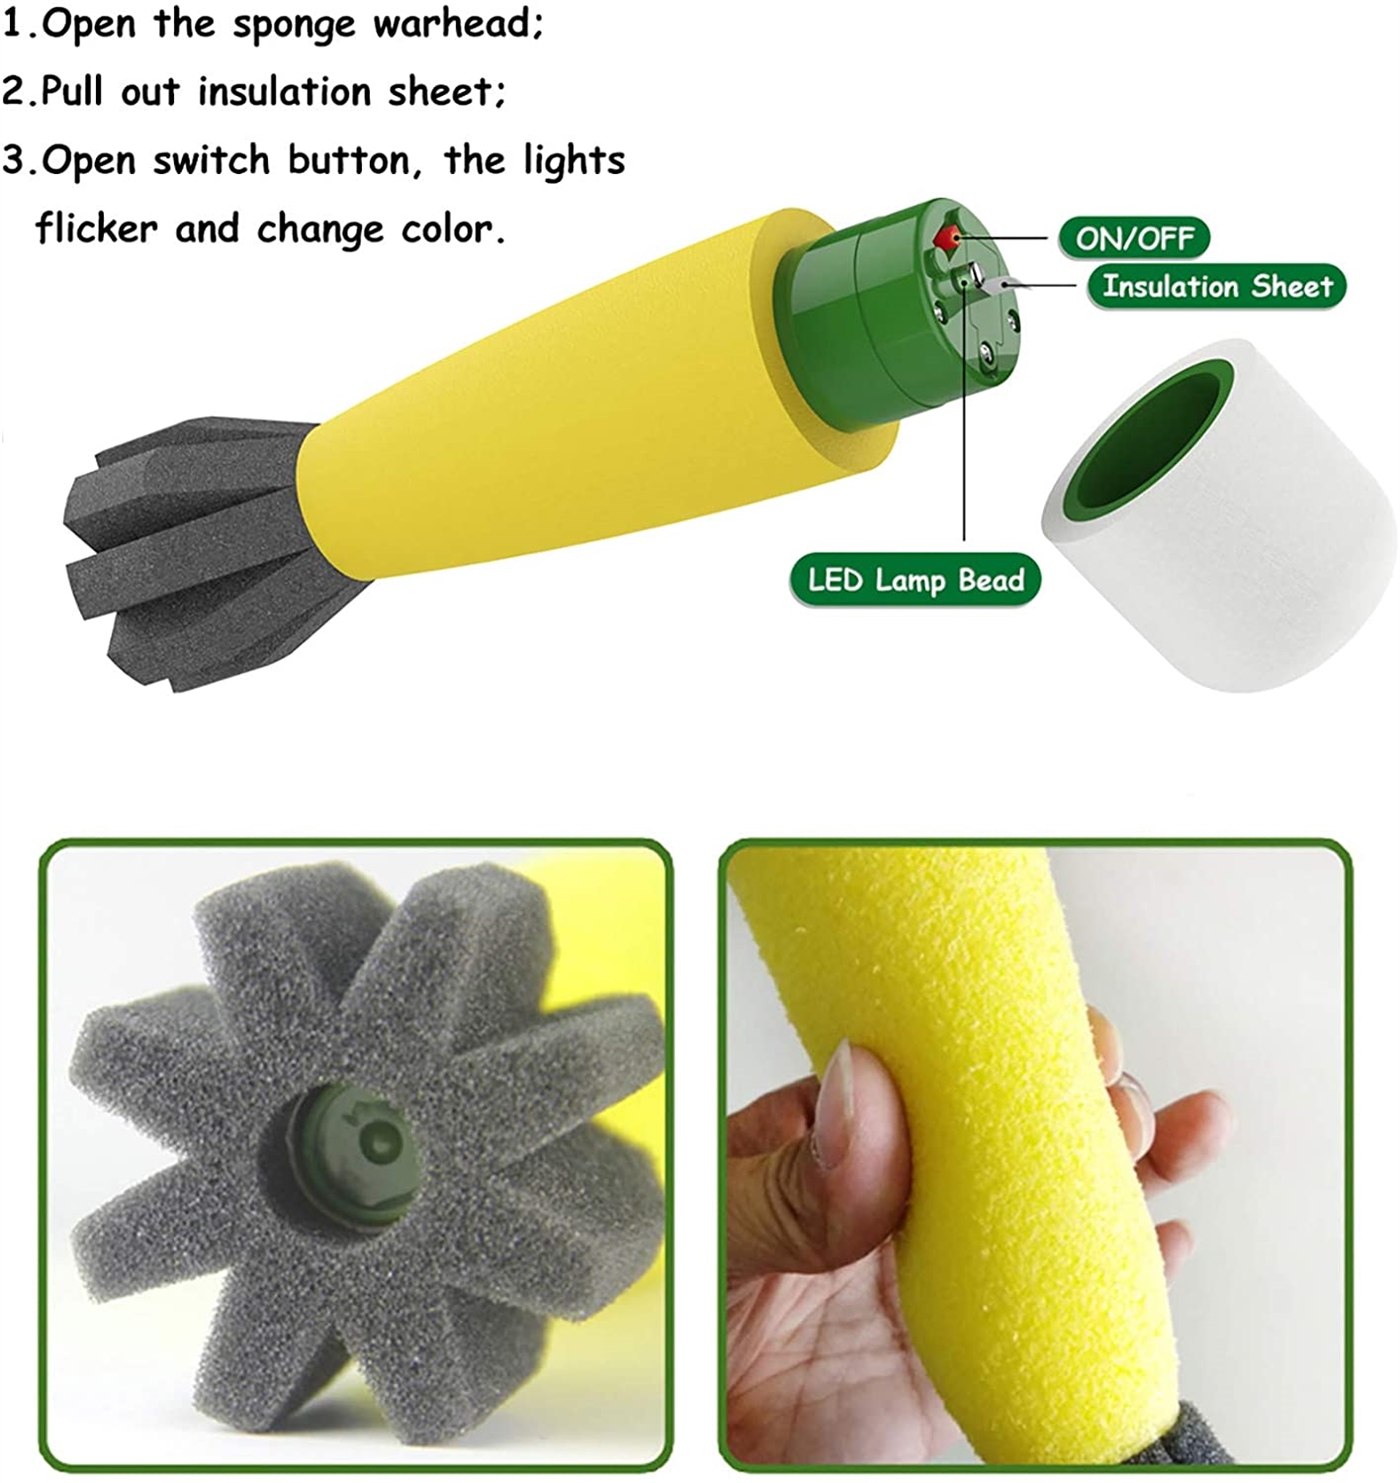 The bullet of the mortar toy is made of soft spongy foam material.